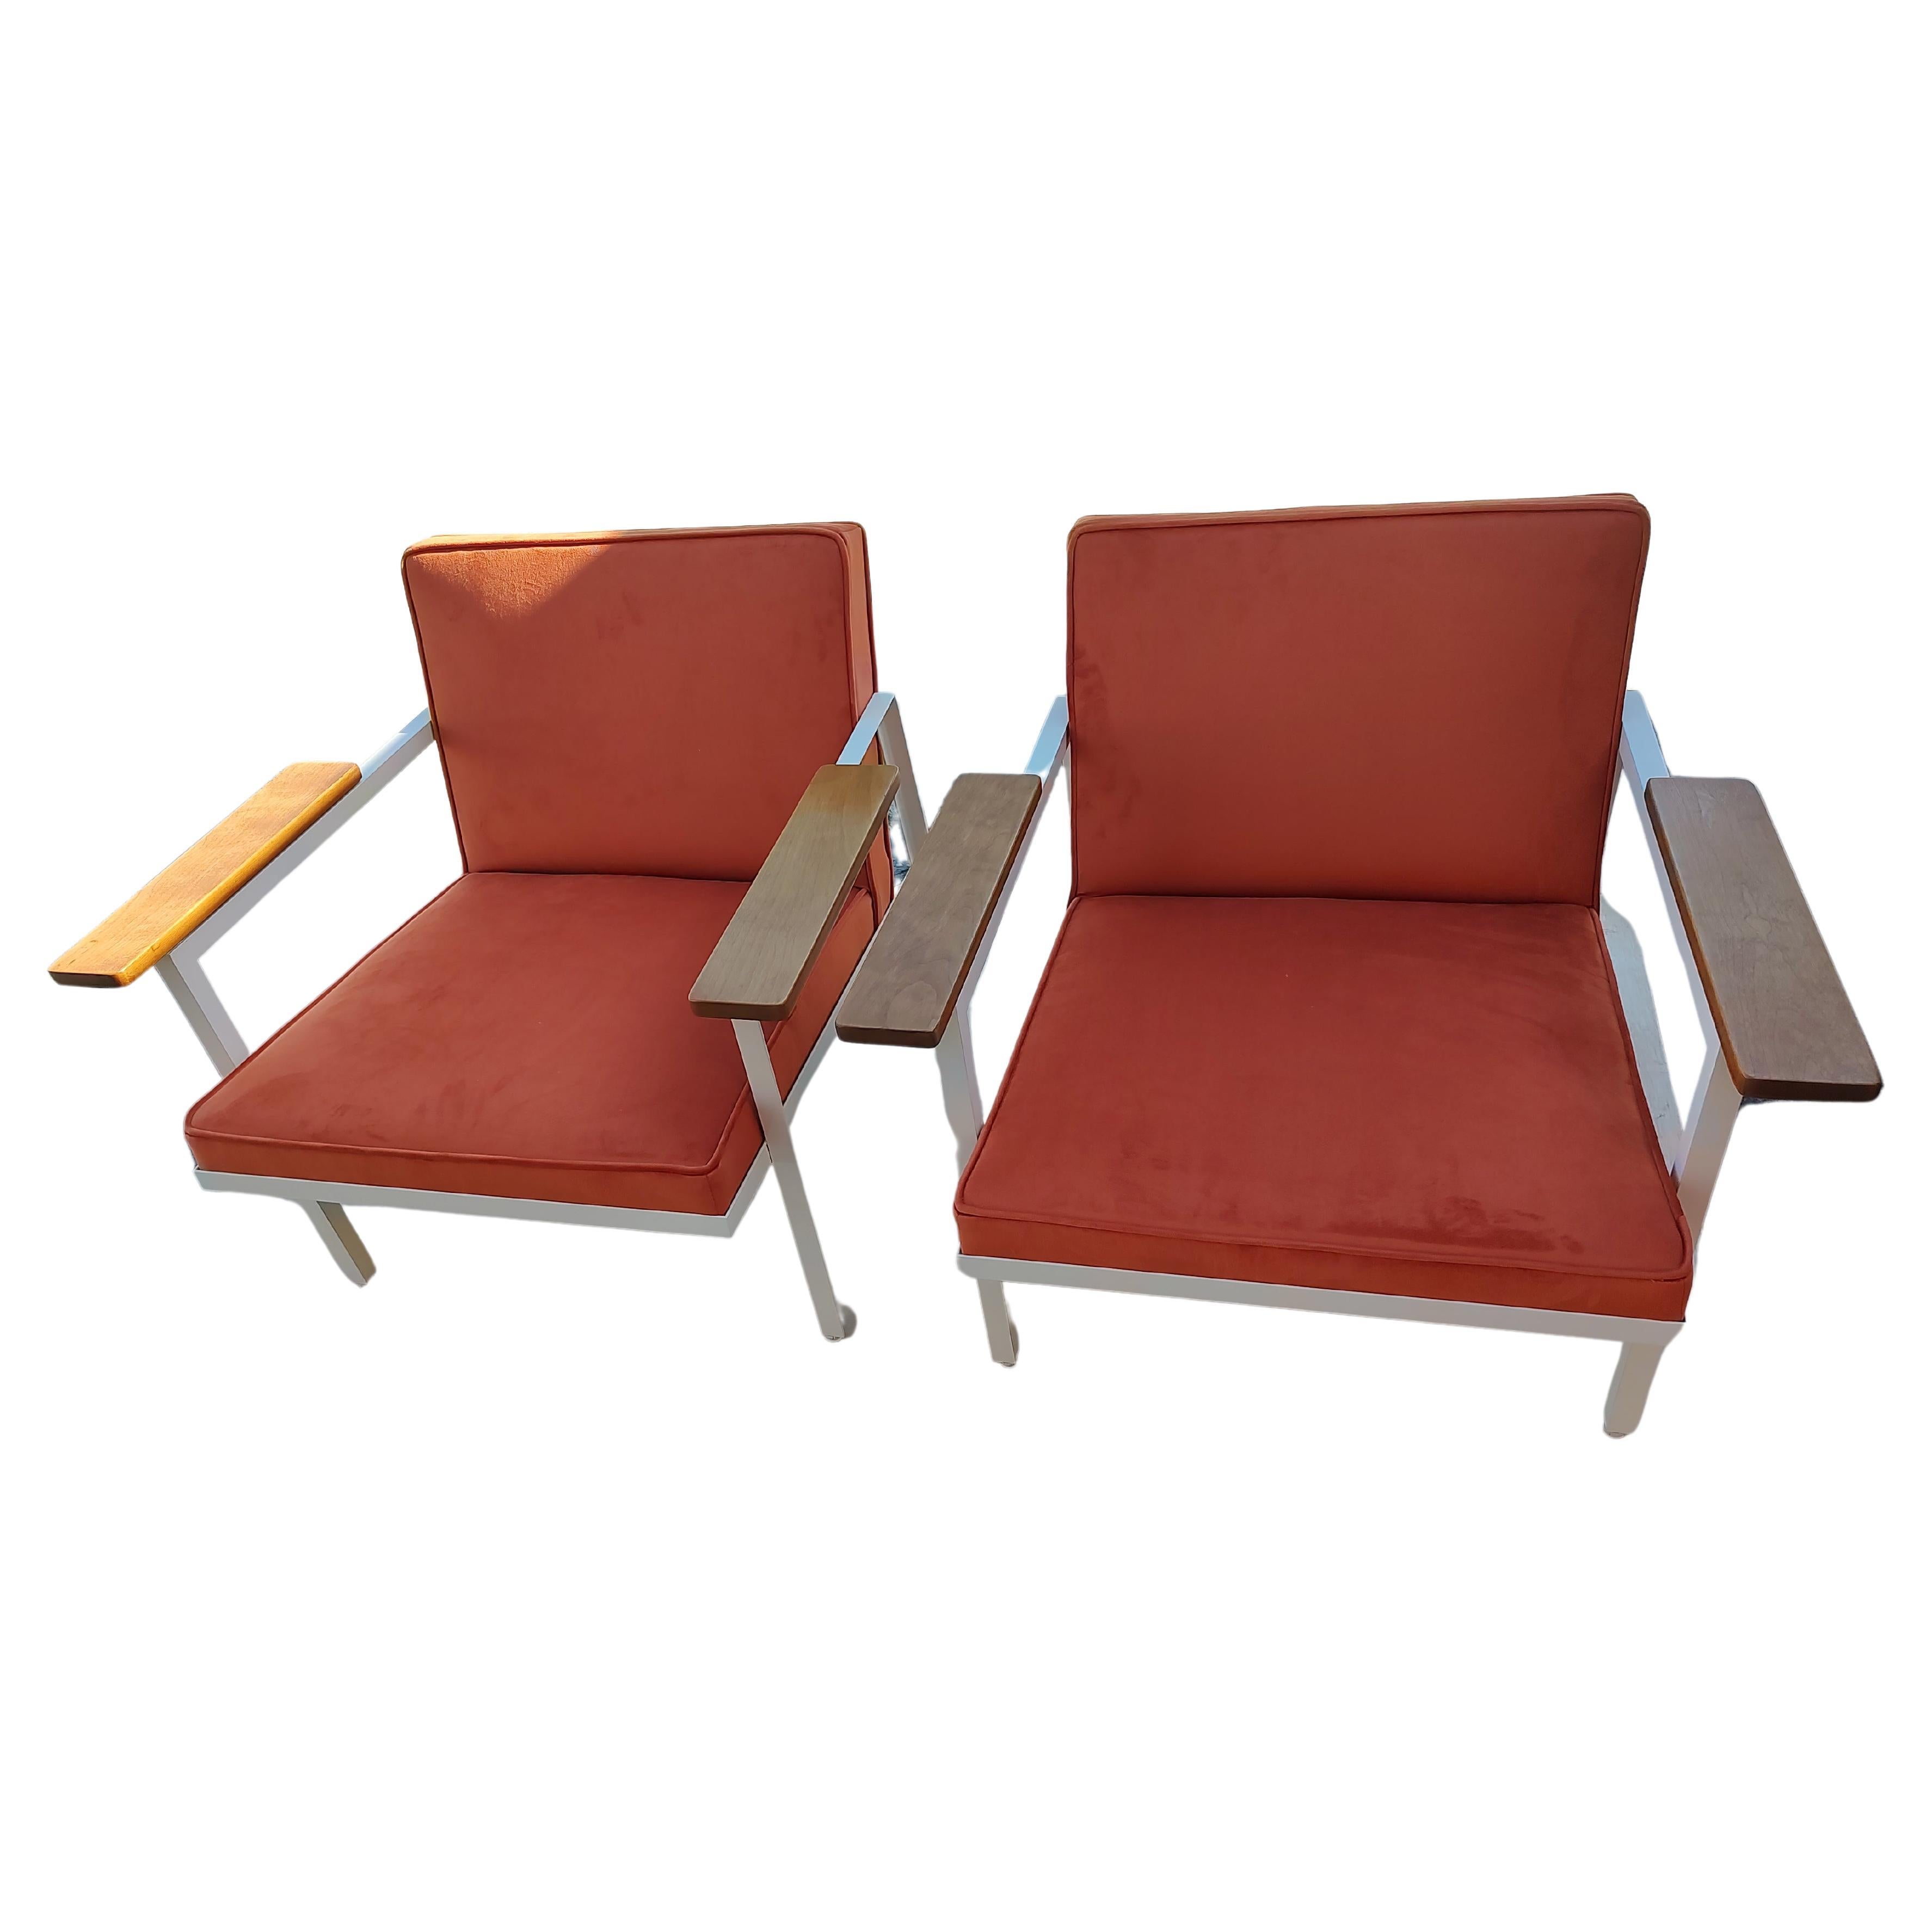 Pair Restored Mid Century Modern Lounge Chairs George Nelson for Herman Miller 